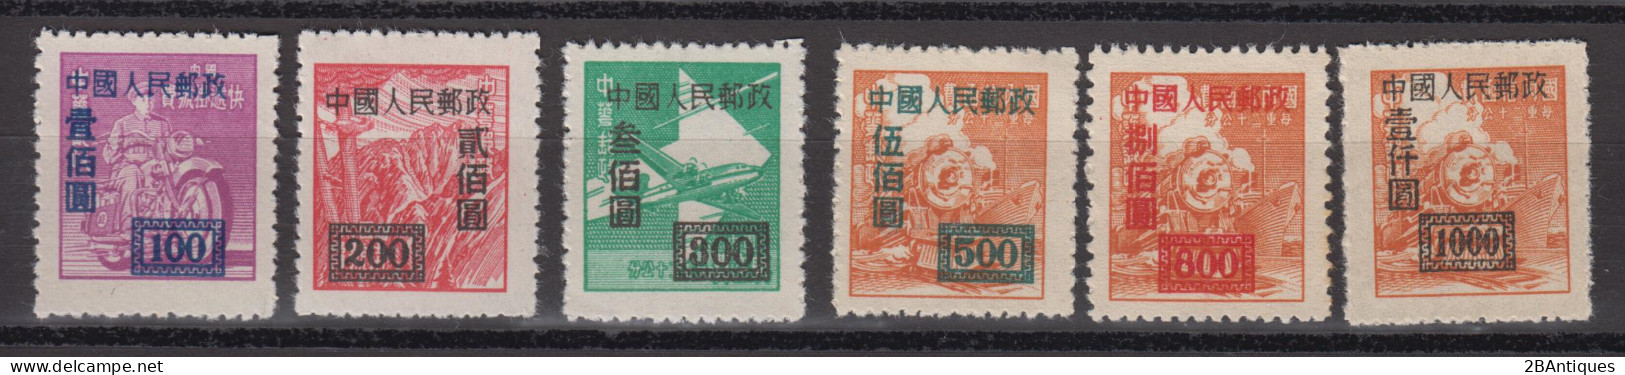 PR CHINA 1950 - Stamps With Overprint Complete Set Perforated 12 1/2 MNGAI - Unused Stamps